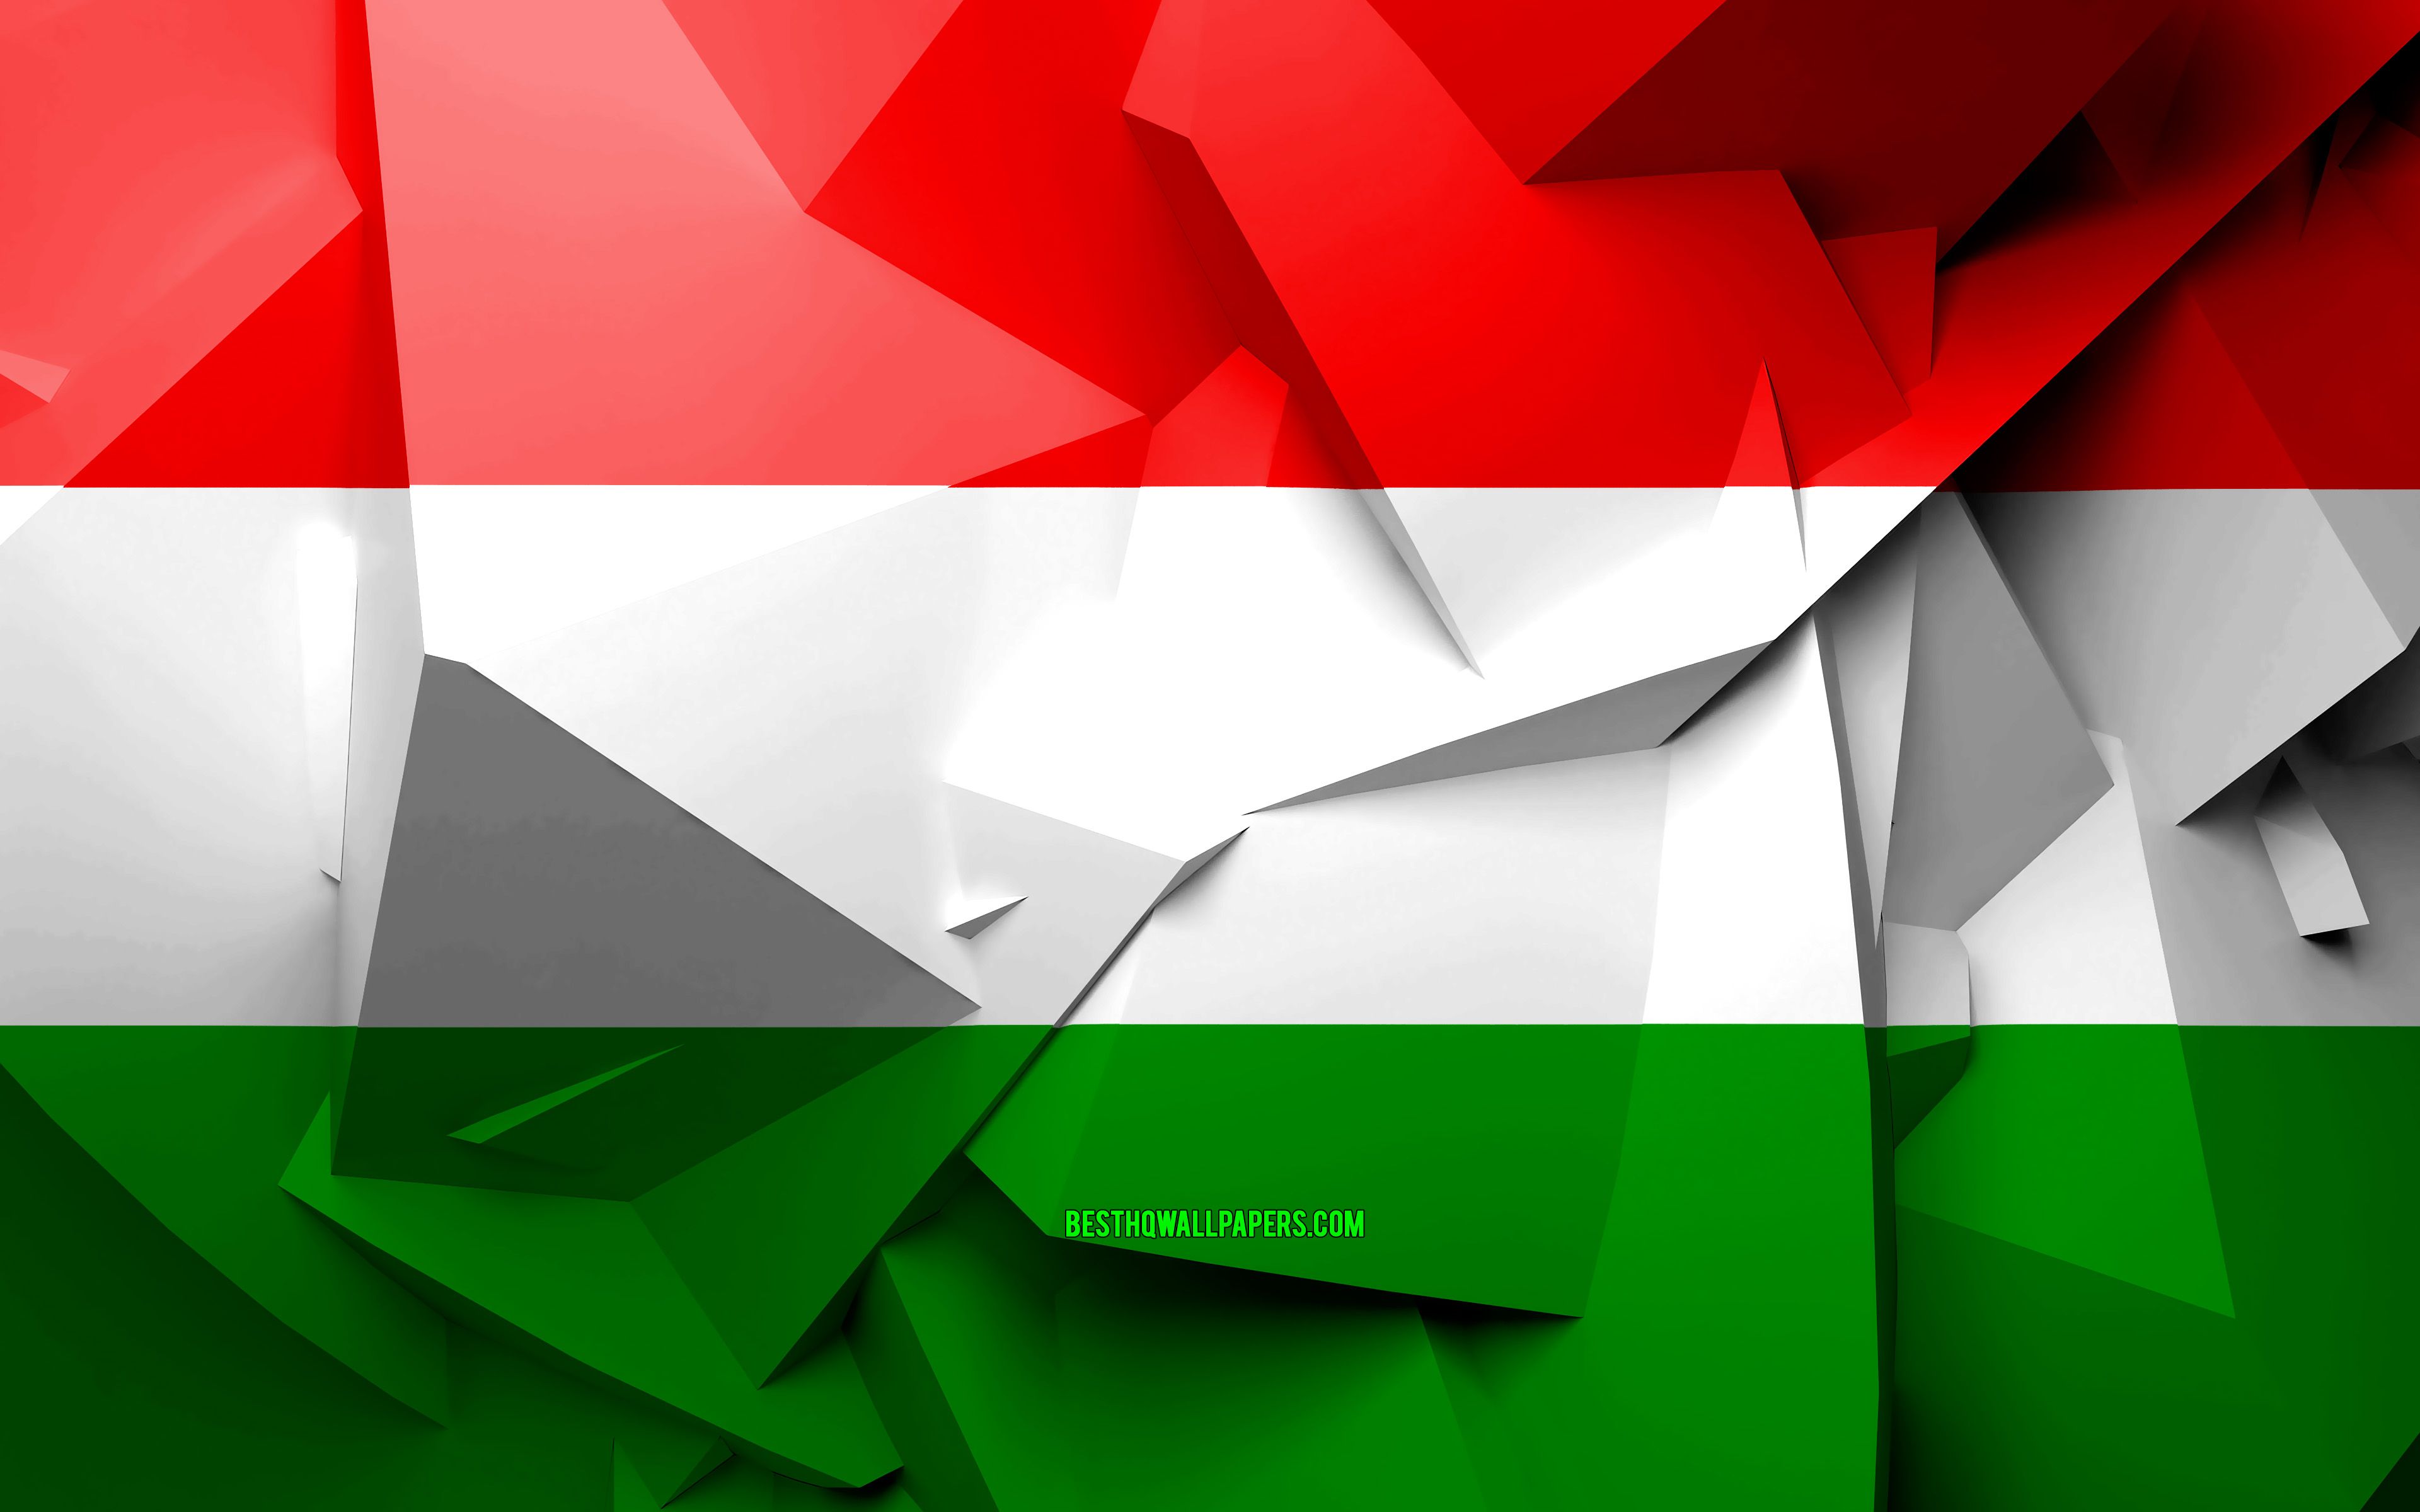 Download wallpaper 4k, Flag of Hungary, geometric art, European countries, Hungarian flag, creative, Hungary, Europe, Hungary 3D flag, national symbols for desktop with resolution 3840x2400. High Quality HD picture wallpaper